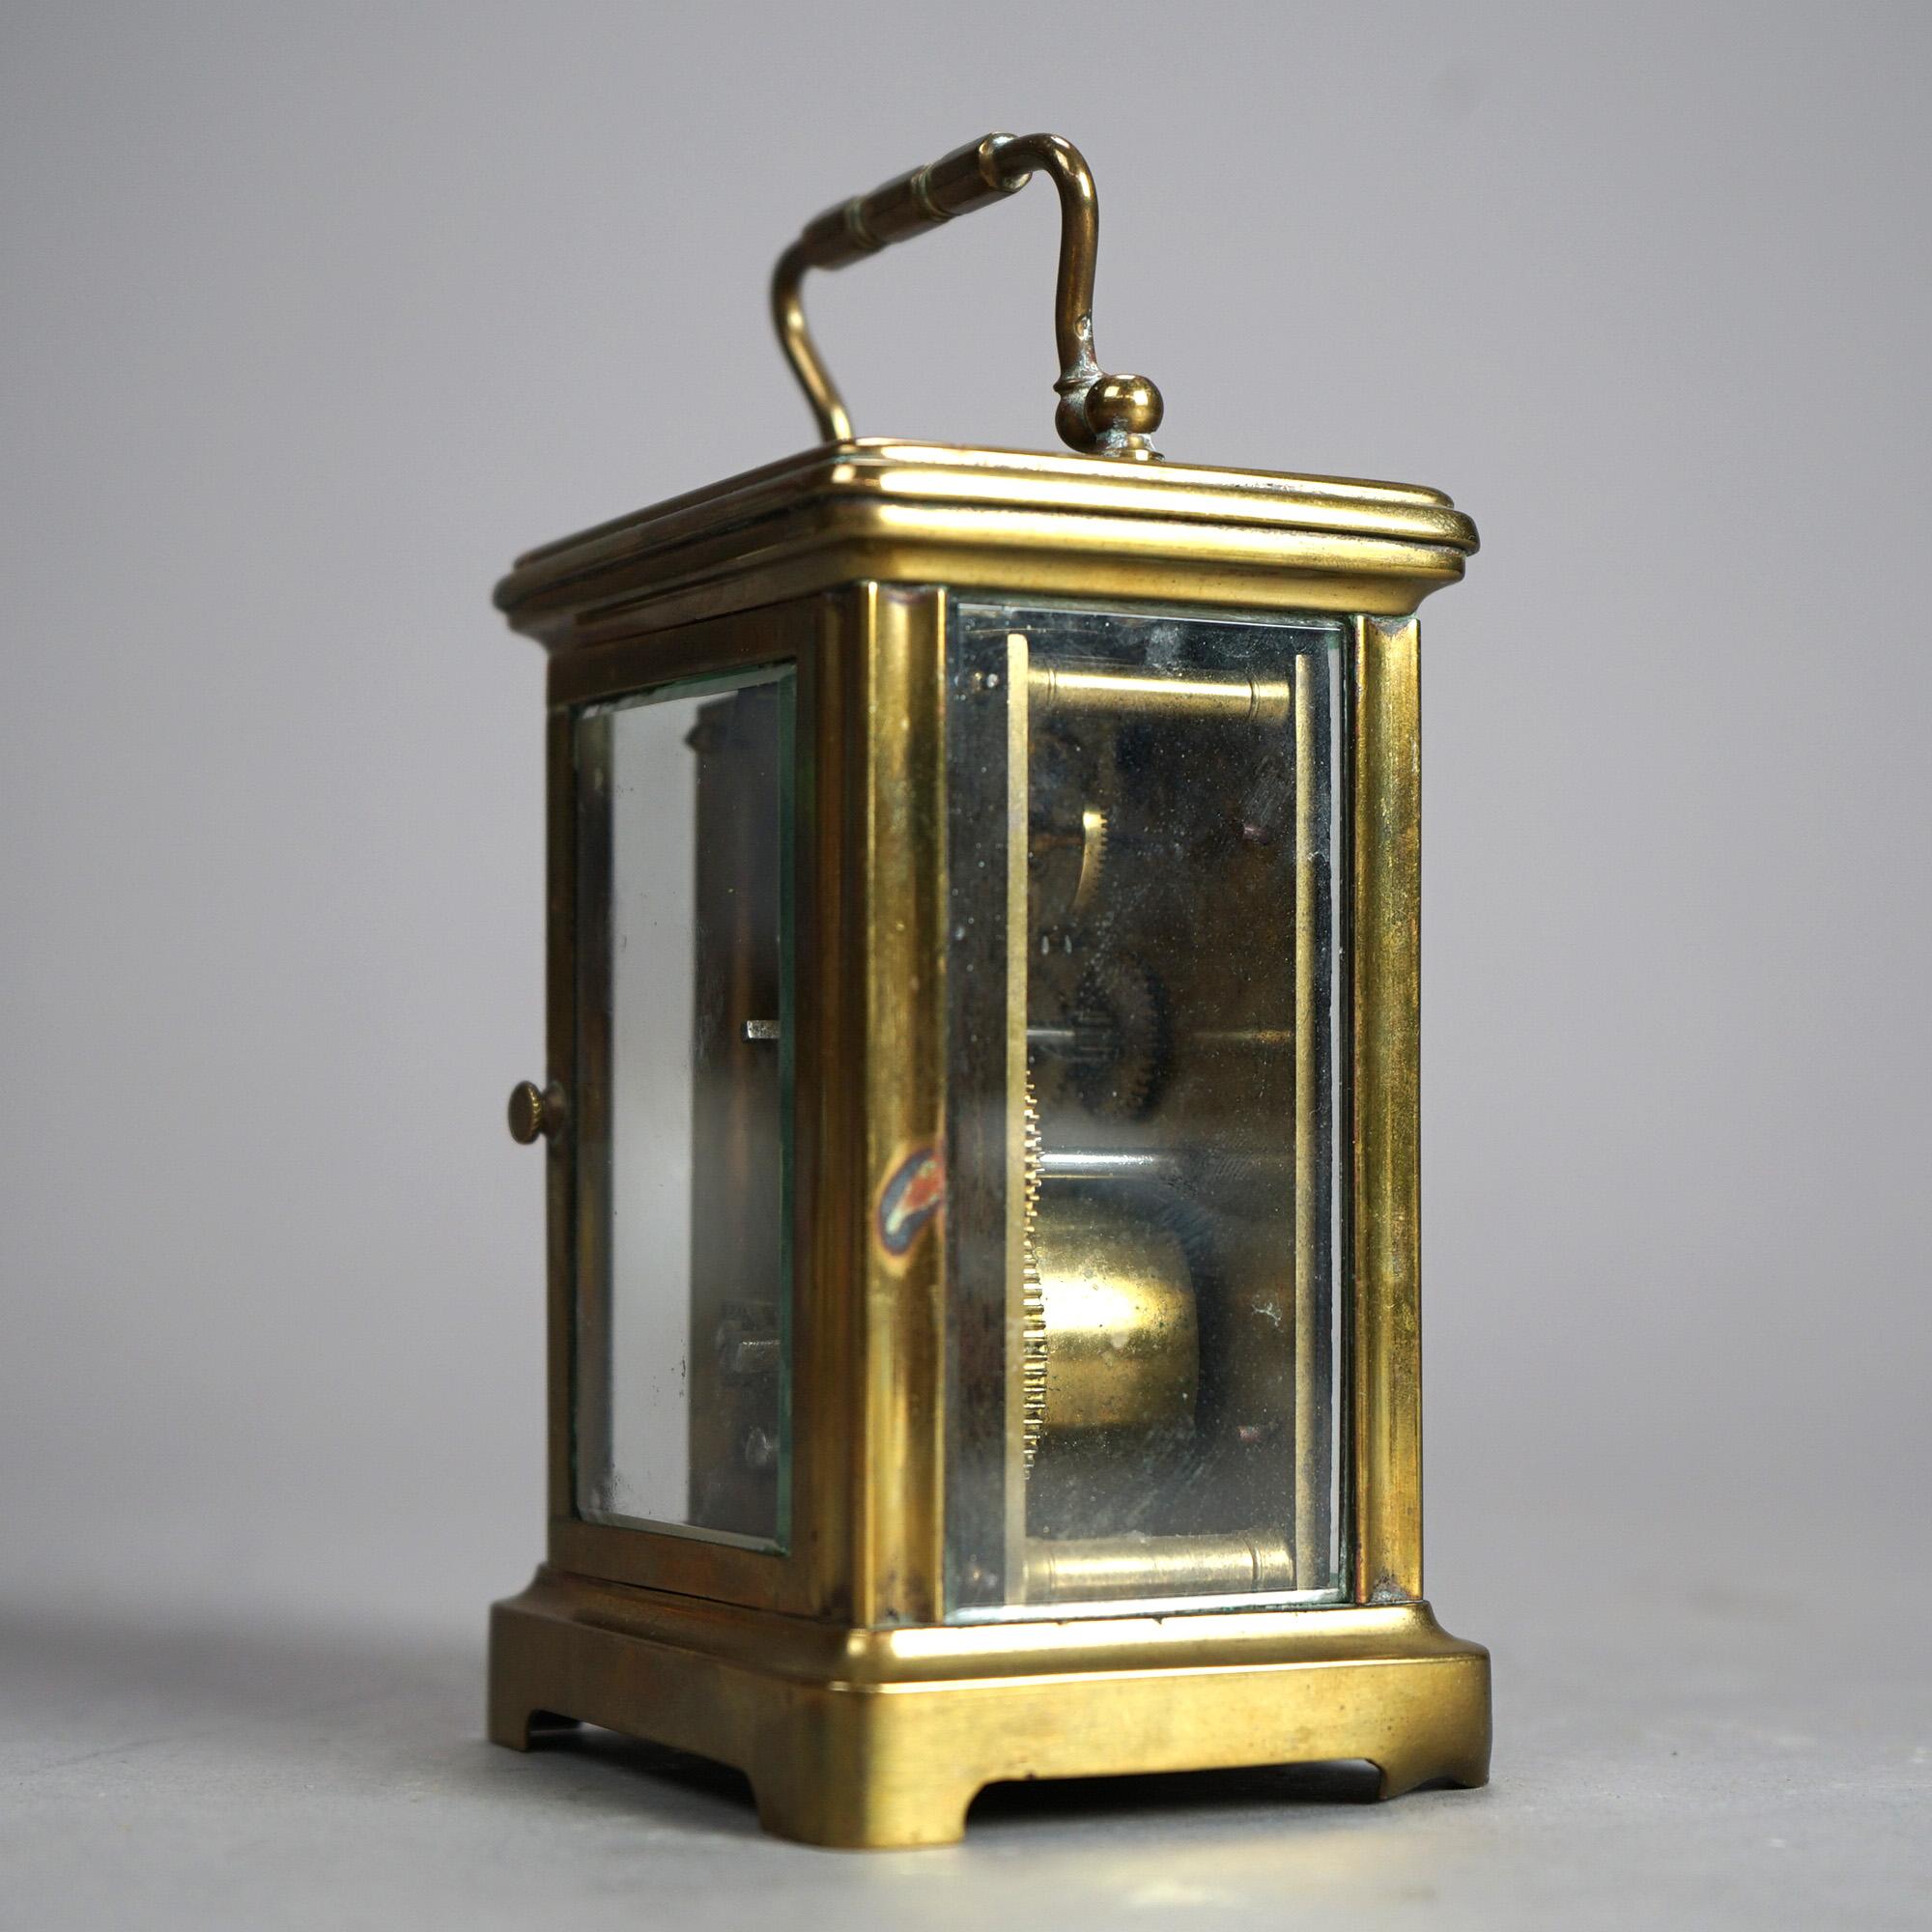 Antique French Victorian Brass & Crystal Carriage Clock with Key Circa 1890 For Sale 4